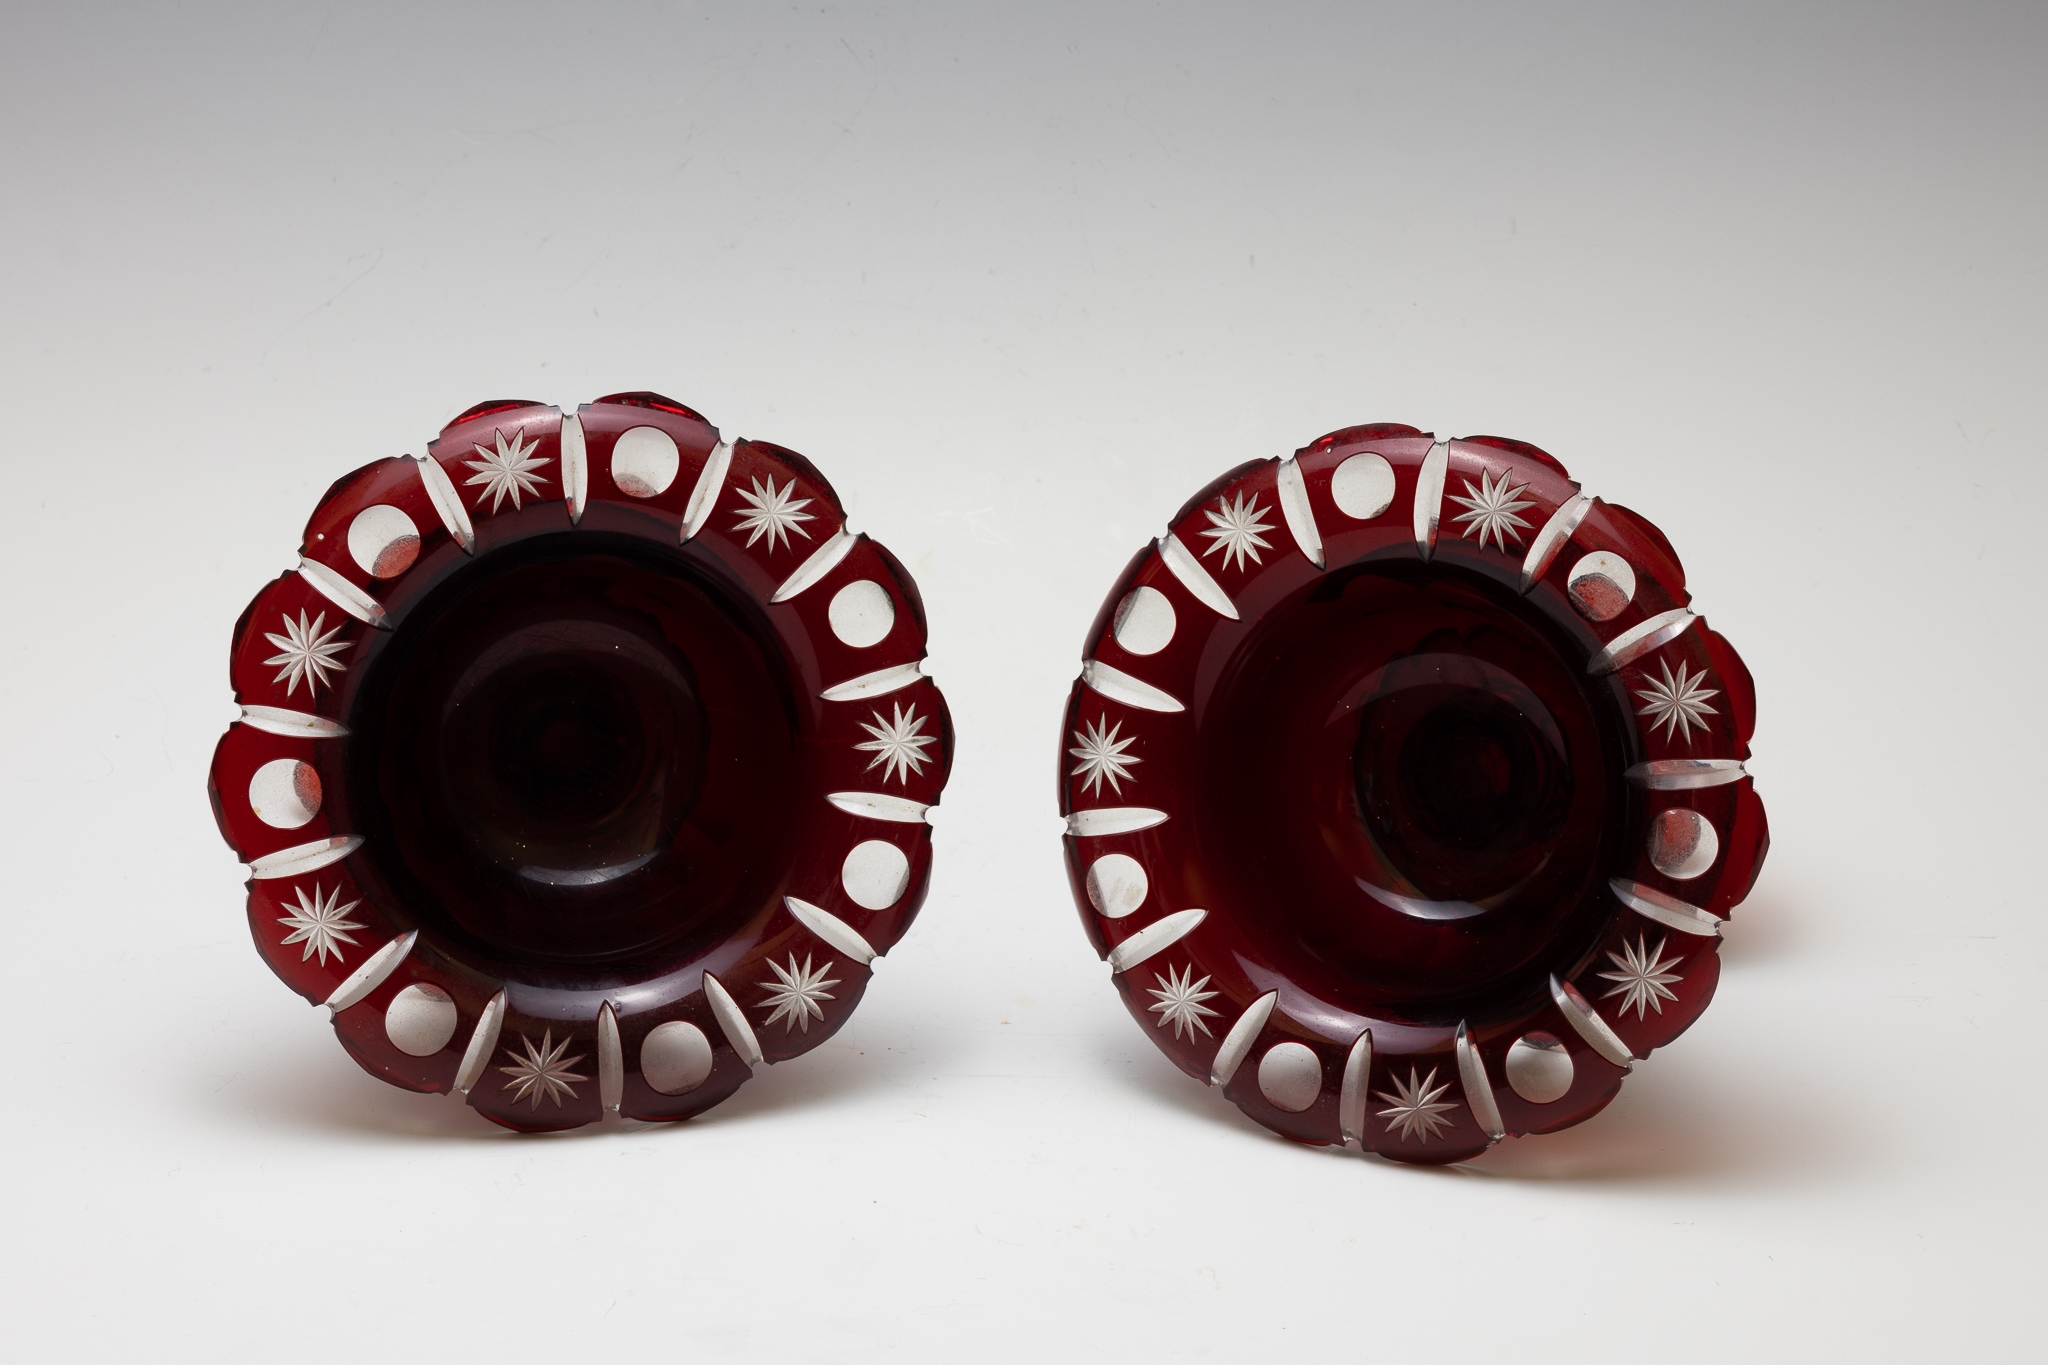 A Pair of Antique Bohemian Ruby Red Glass Tazza Bowl from the 19th Century.

H: Approximately 15cm  - Image 2 of 2